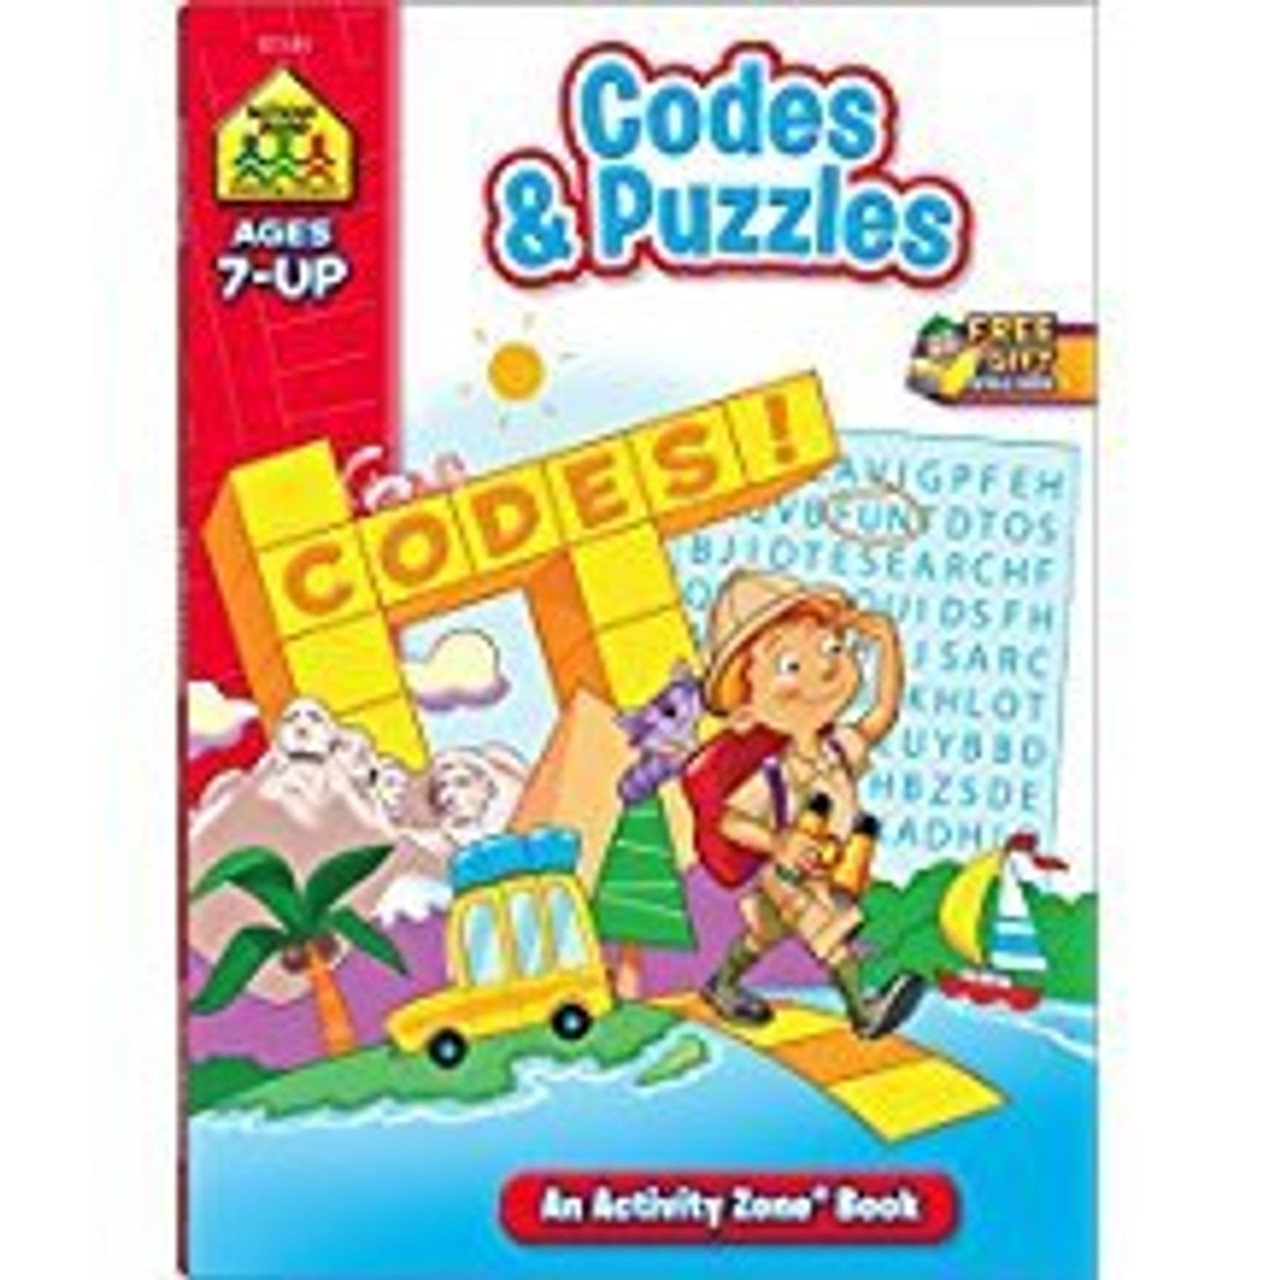 CODES & PUZZLES AGES 7-UP